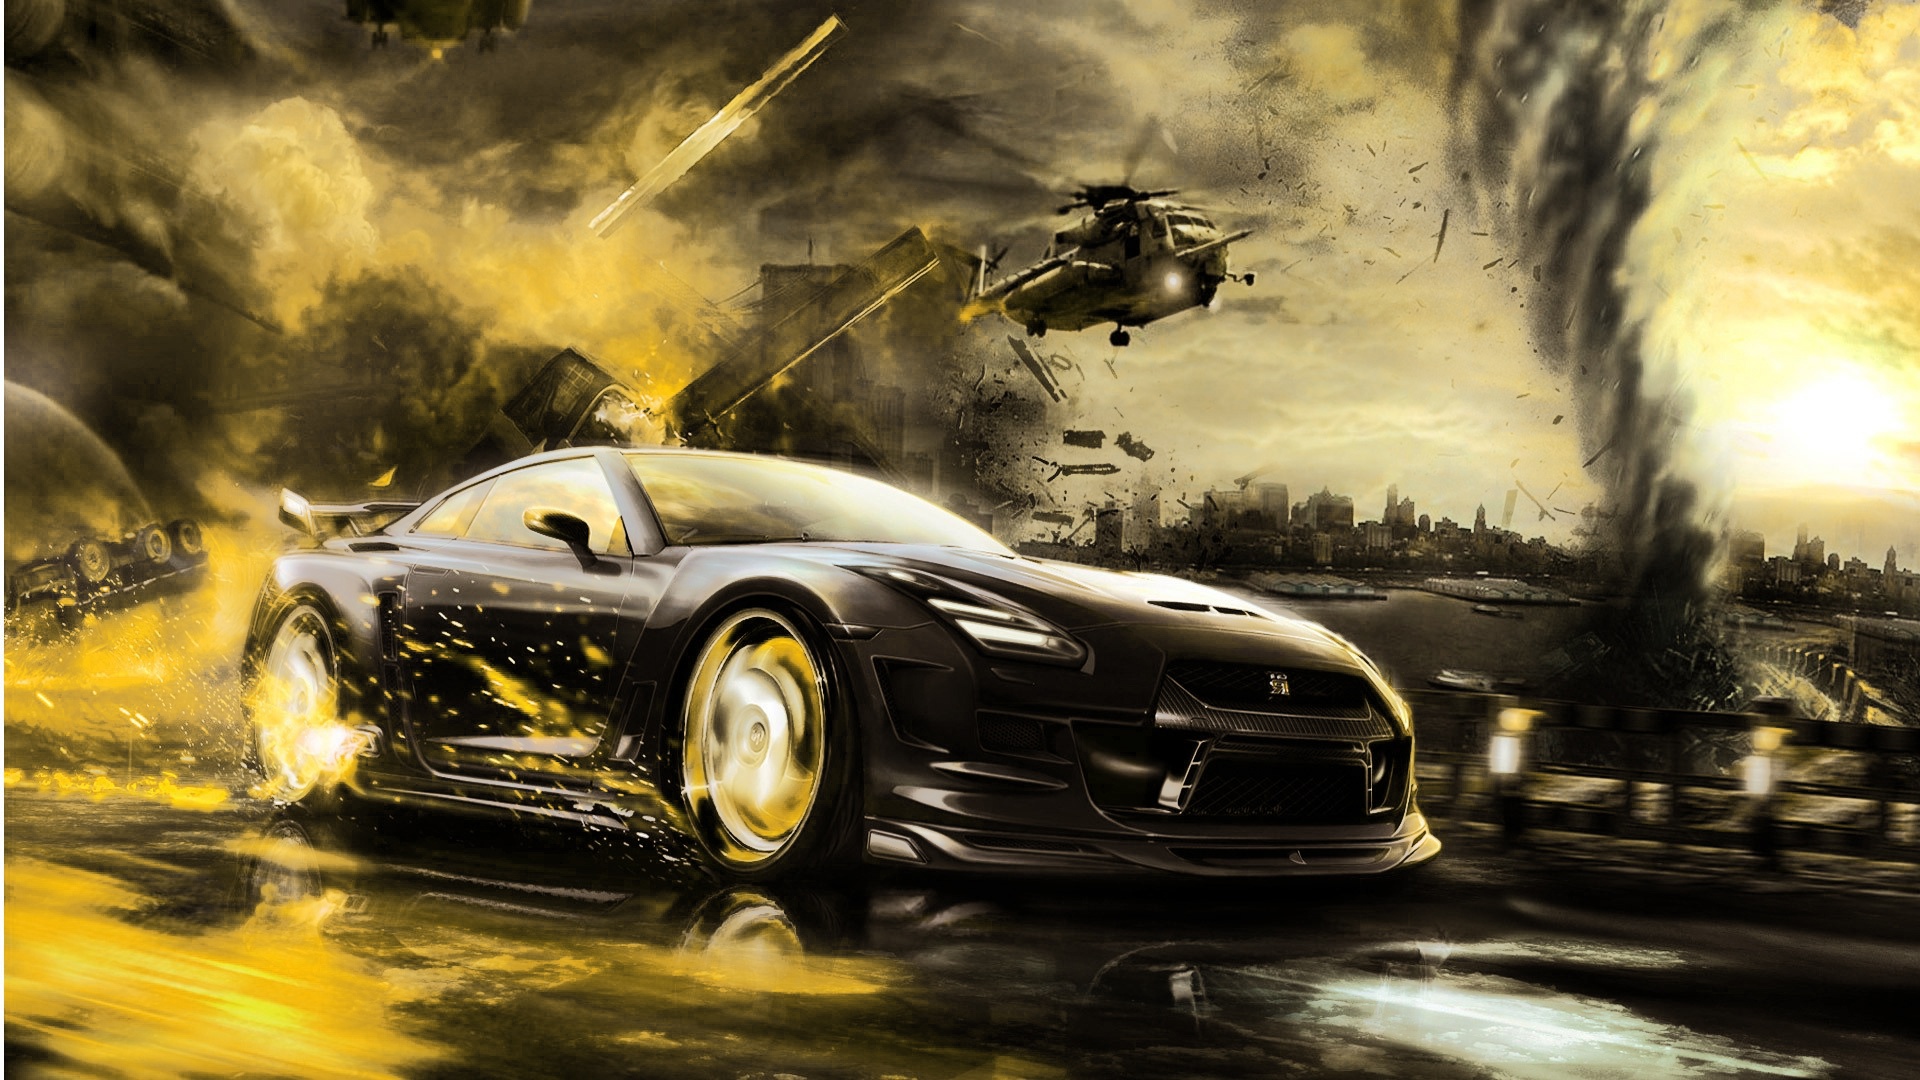 hd wallpapers 1080p hd wallpaper 1080p 2560x1600 Car Pictures